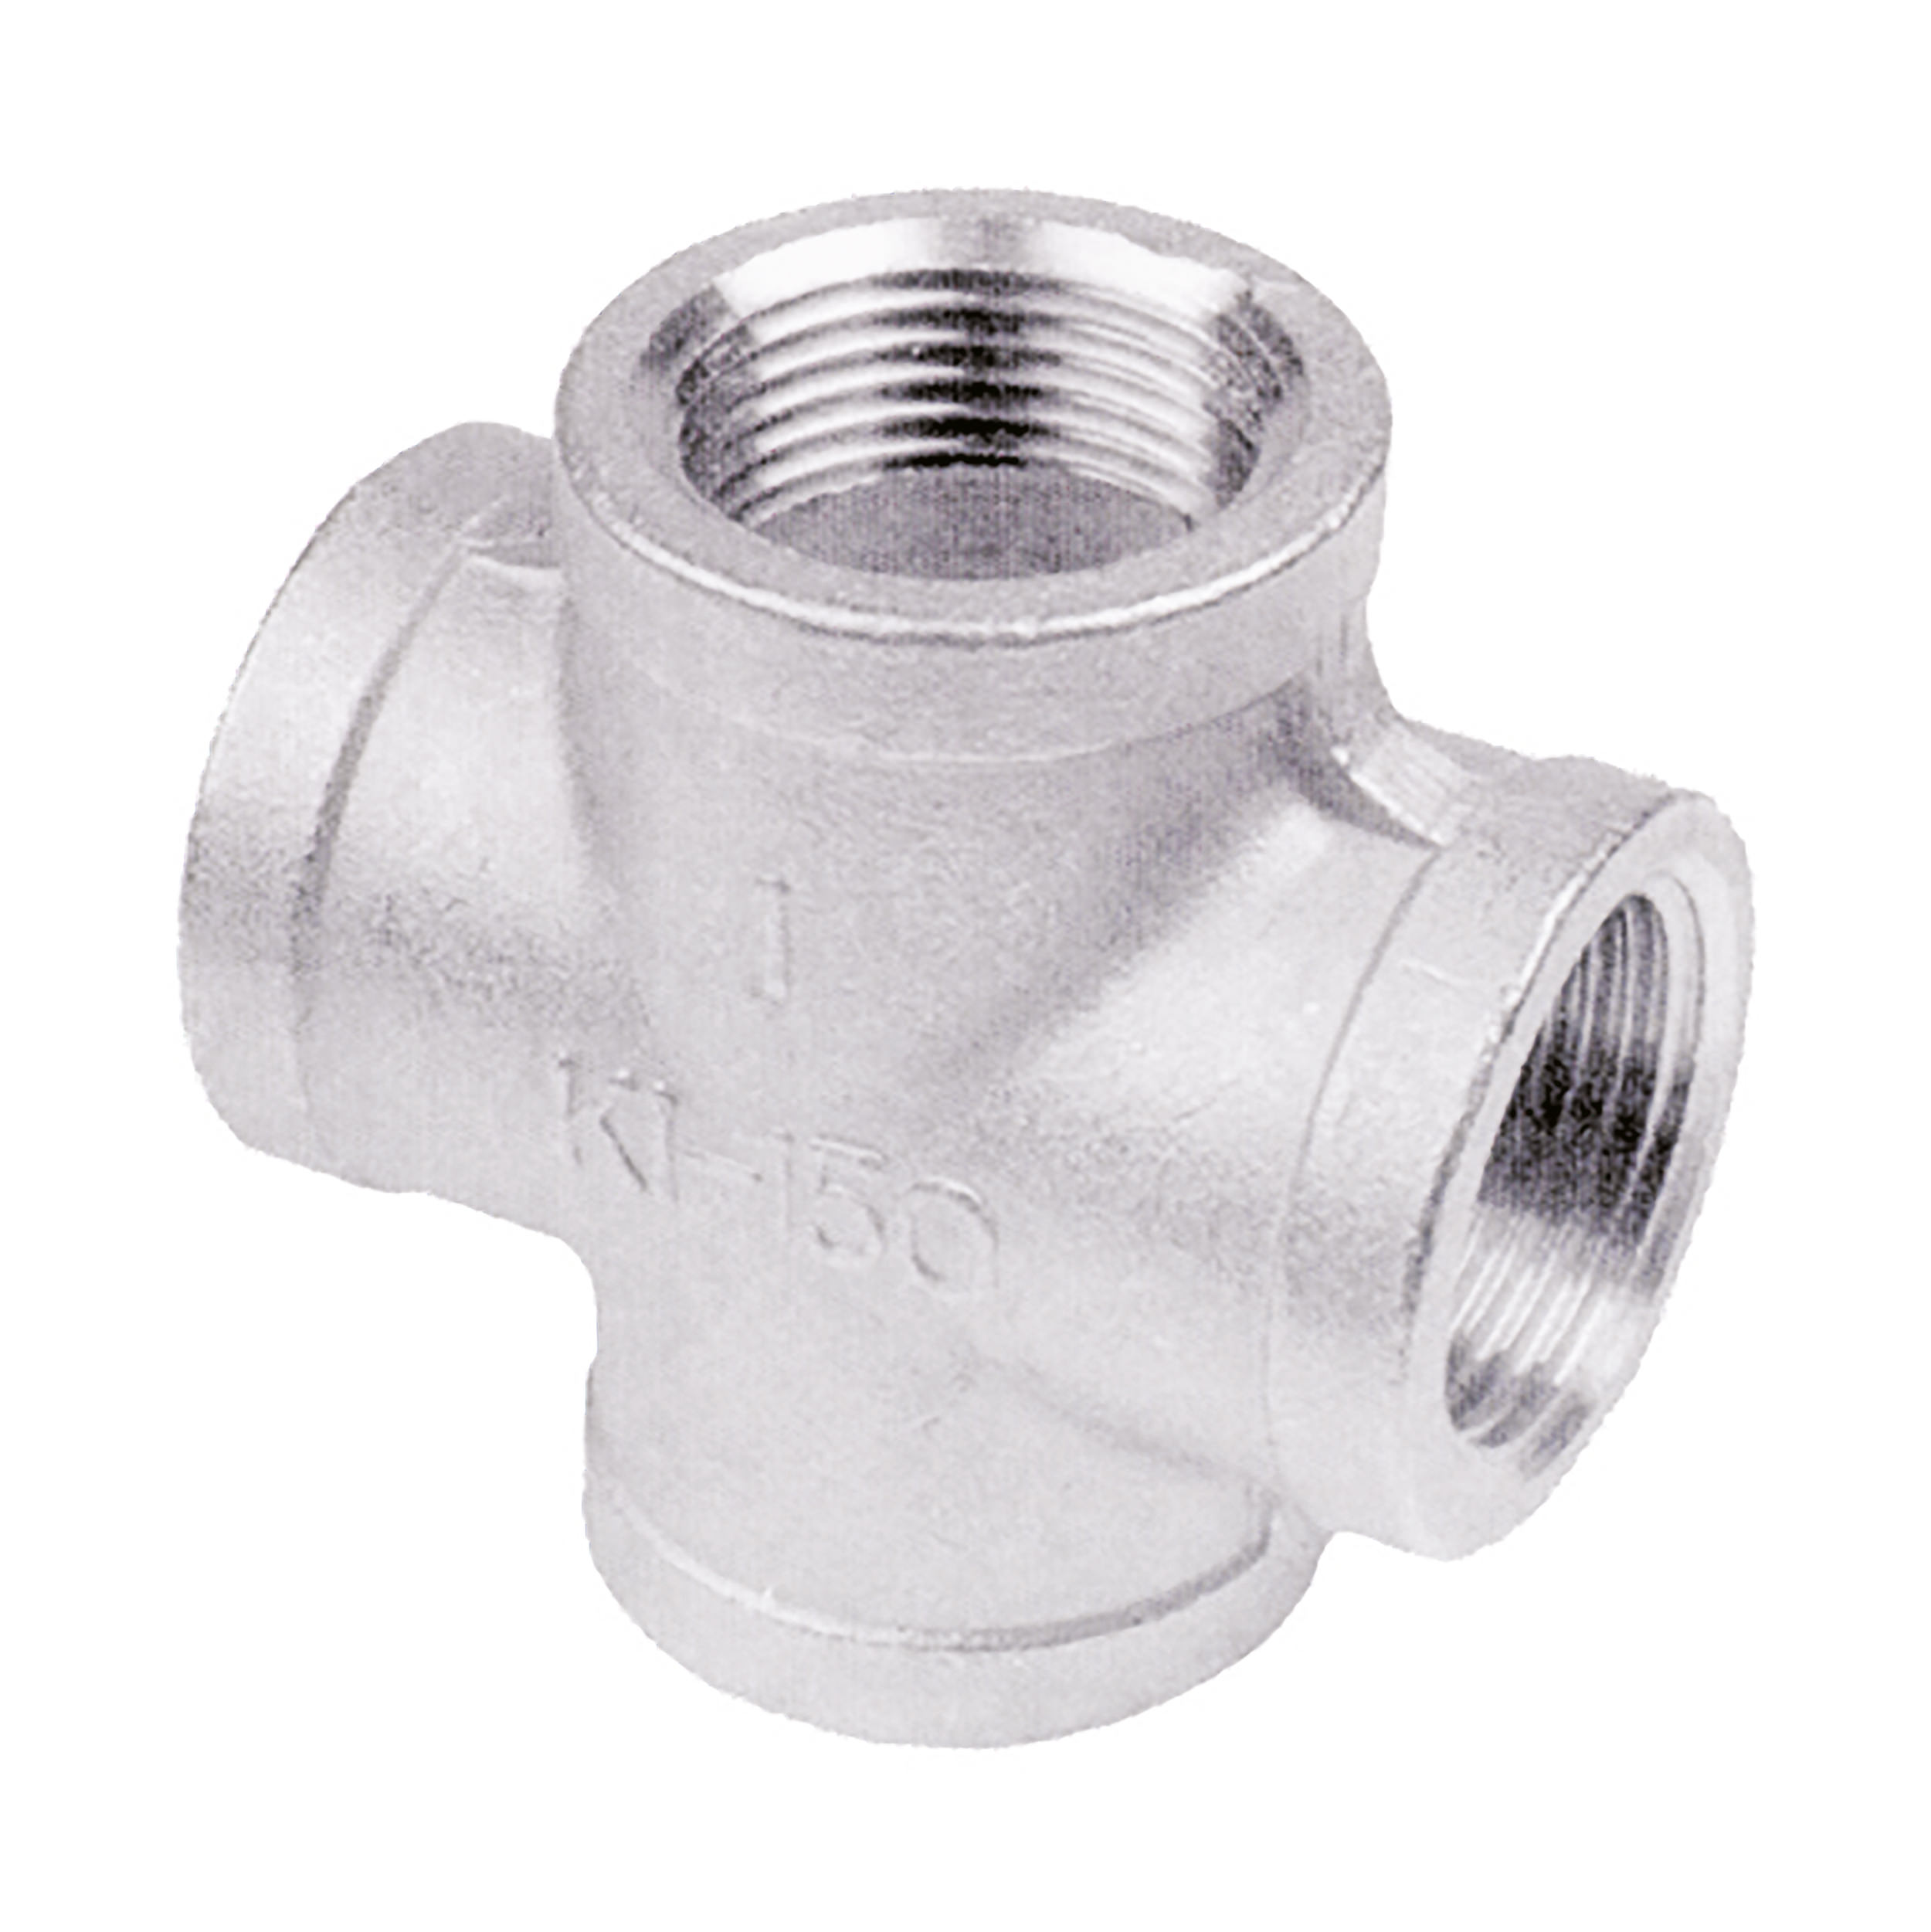 Threaded crosspiece stainless steel, V4A, connection: G¼ female (cylindrical/DIN ISO 228) dimensions: length: 38 mm, DN 8, Ø18 mm